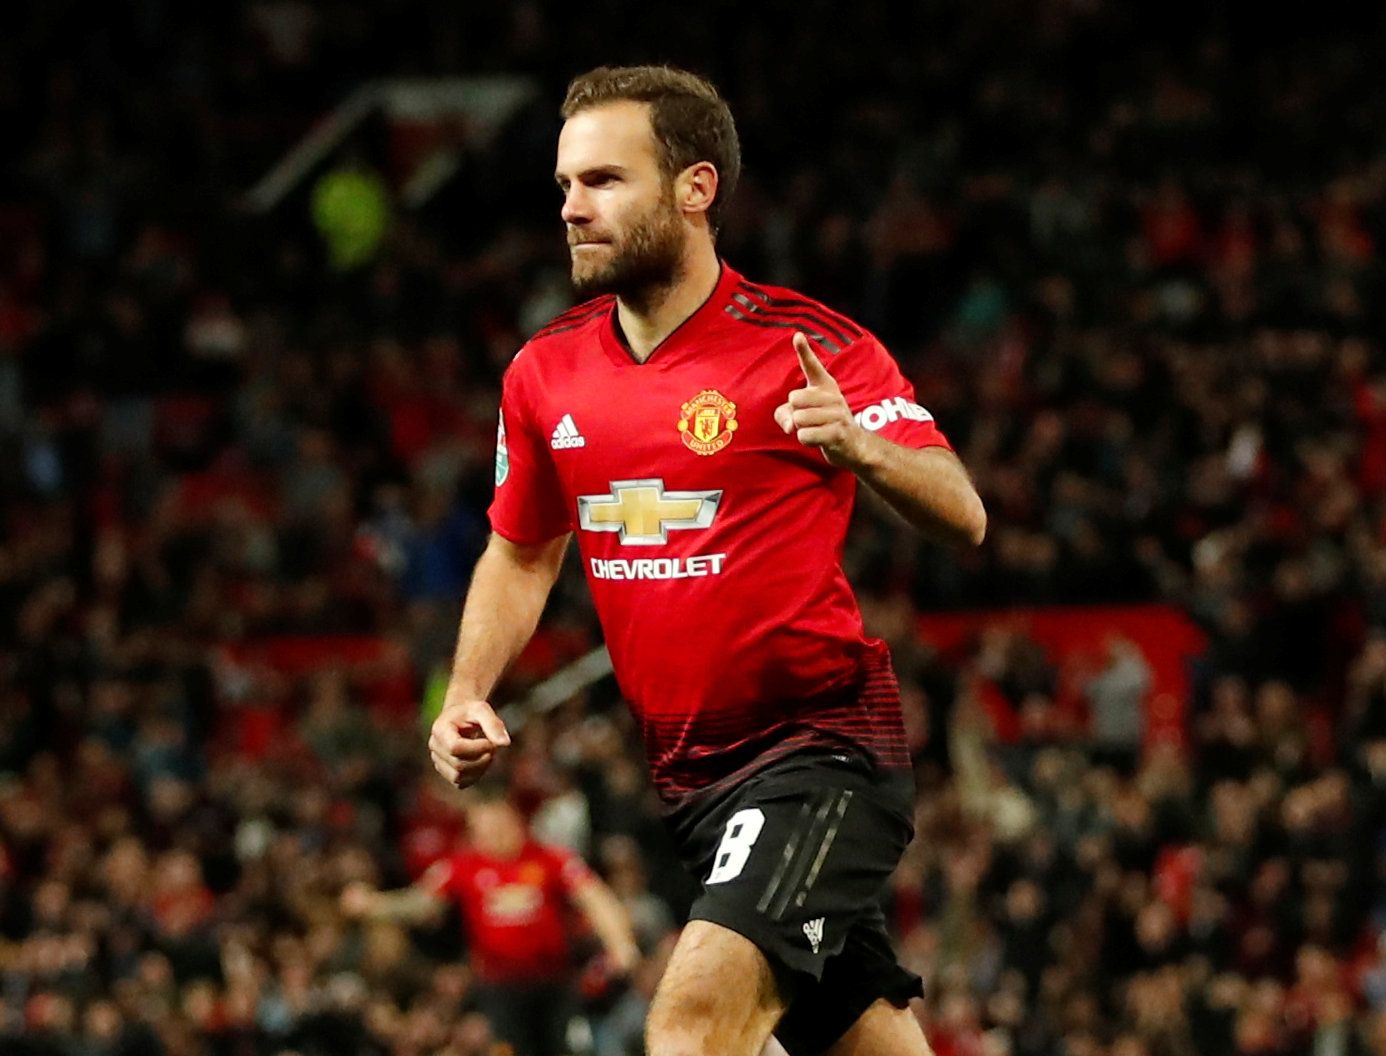 Soccer Football - Carabao Cup - Third Round - Manchester United v Derby County - Old Trafford, Manchester, Britain - September 25, 2018  Manchester United's Juan Mata celebrates scoring their first goal   Action Images via Reuters/Andrew Boyers  EDITORIAL USE ONLY. No use with unauthorized audio, video, data, fixture lists, club/league logos or 